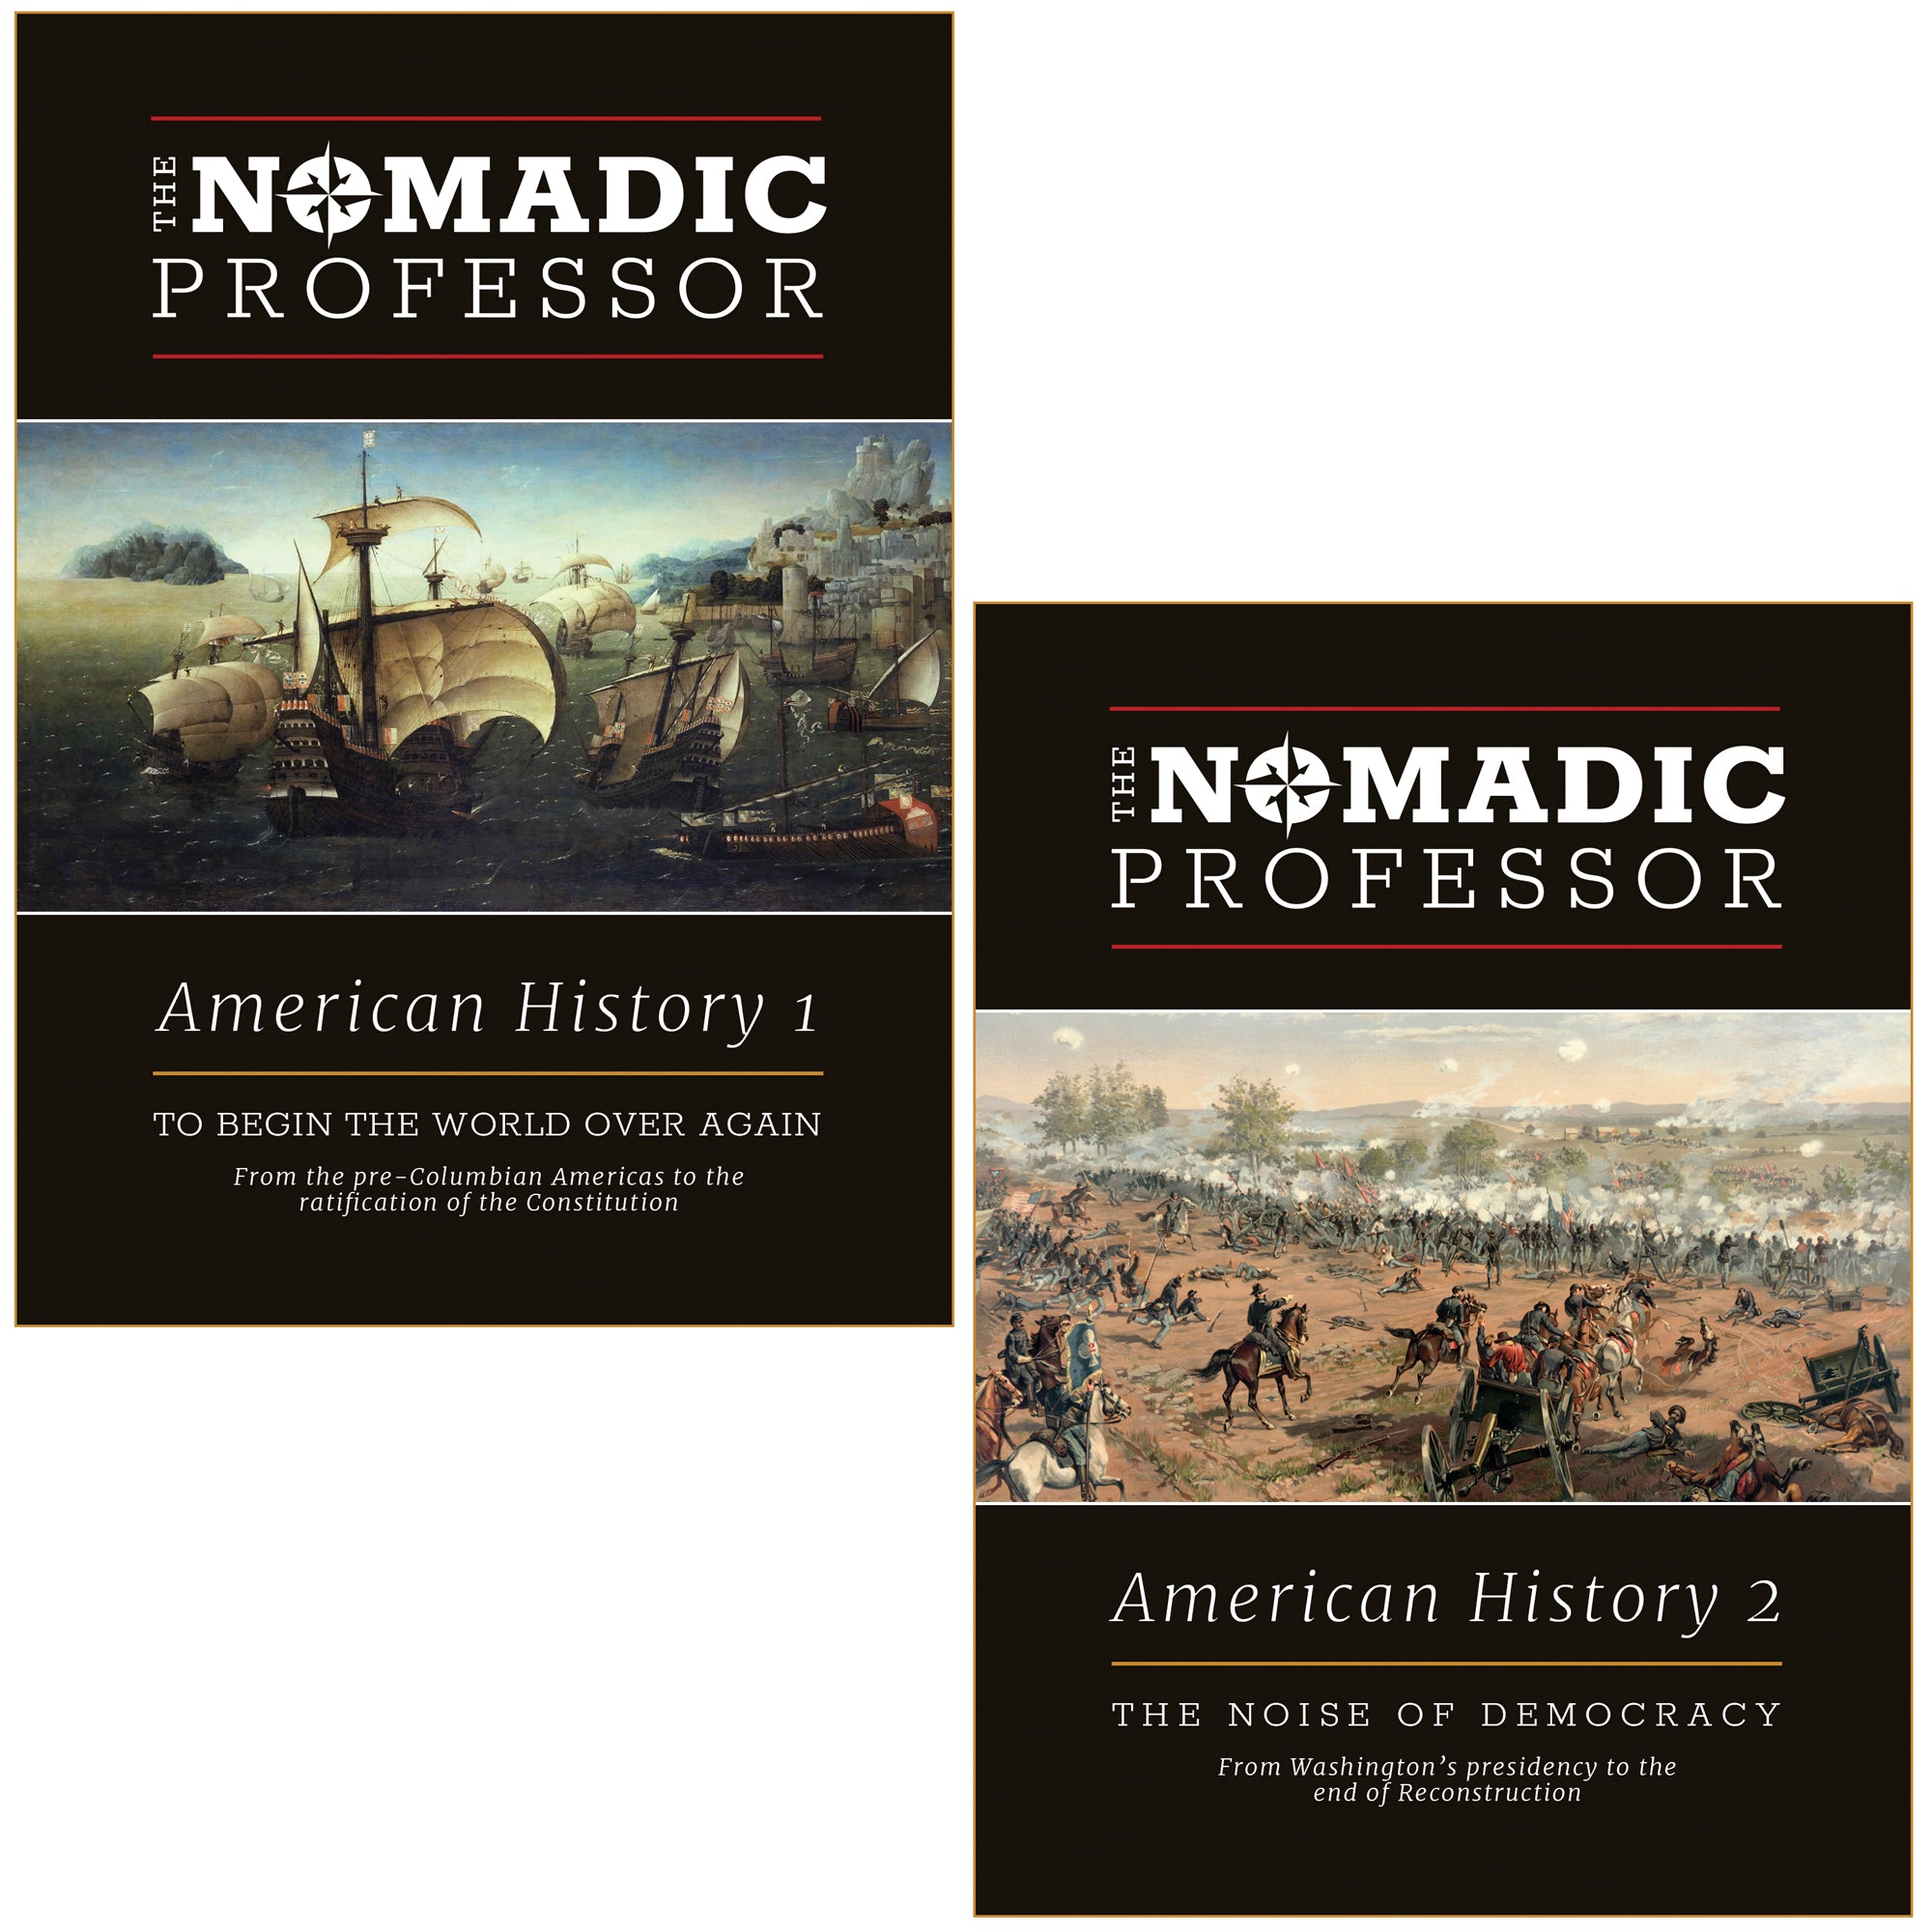 2 Nomadic Professor cover images. On the left is The Nomadic Professor, American History 1.  Black background with white text and in the middle is an image of ships in the pre-Columbian Americas era. On the right is The Nomadic Professor, American History 2.  Black background with white text and in the middle is an image of a battle scene with soldiers fighting and riding horses into battle.